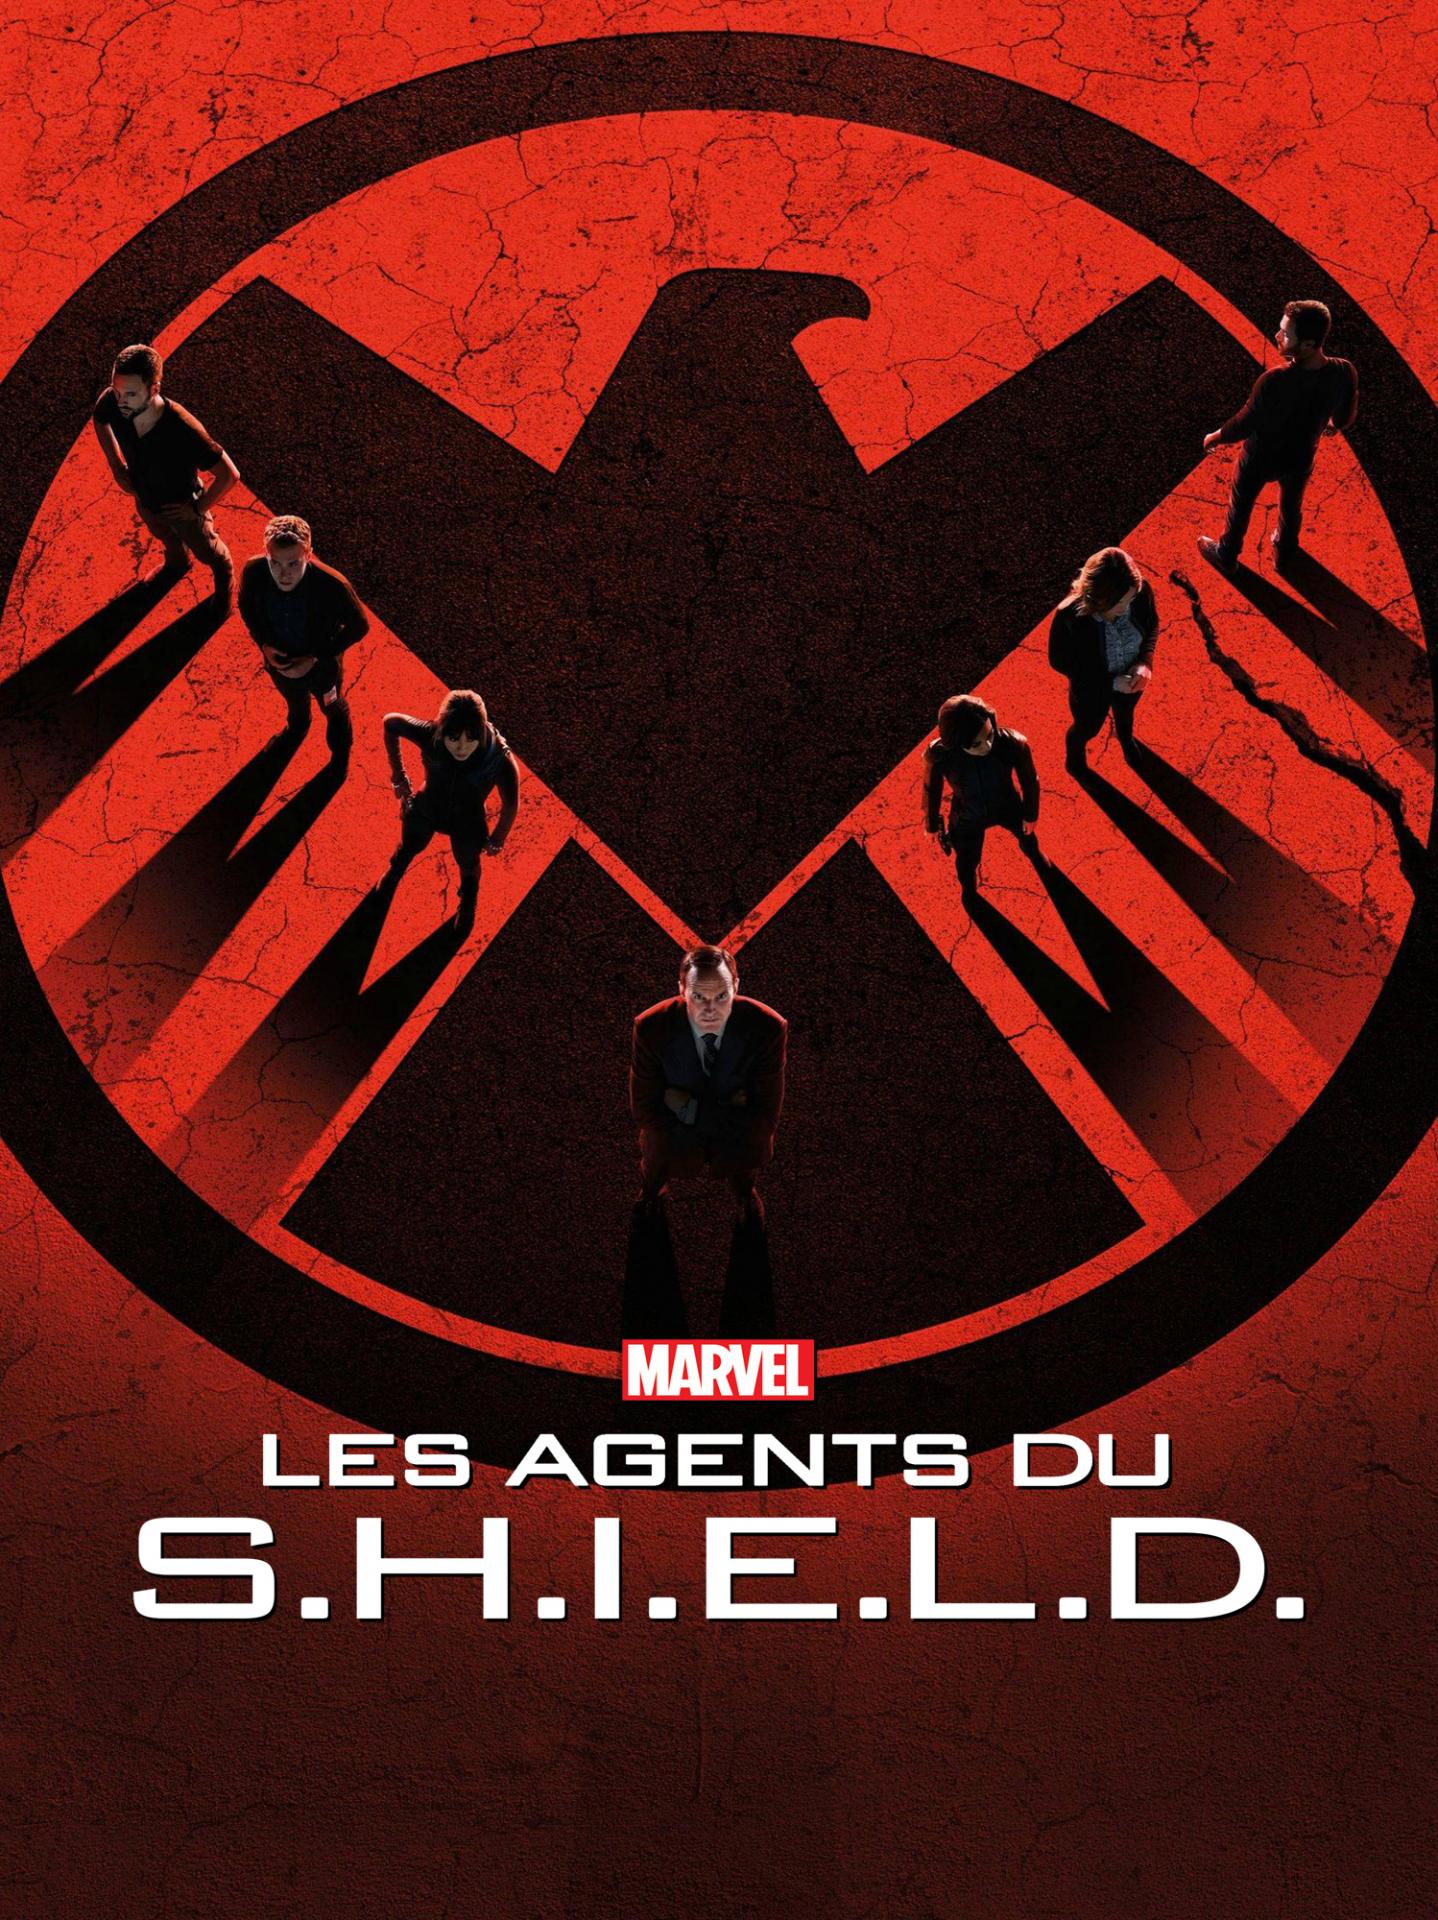 Agentsofshield s2 poster